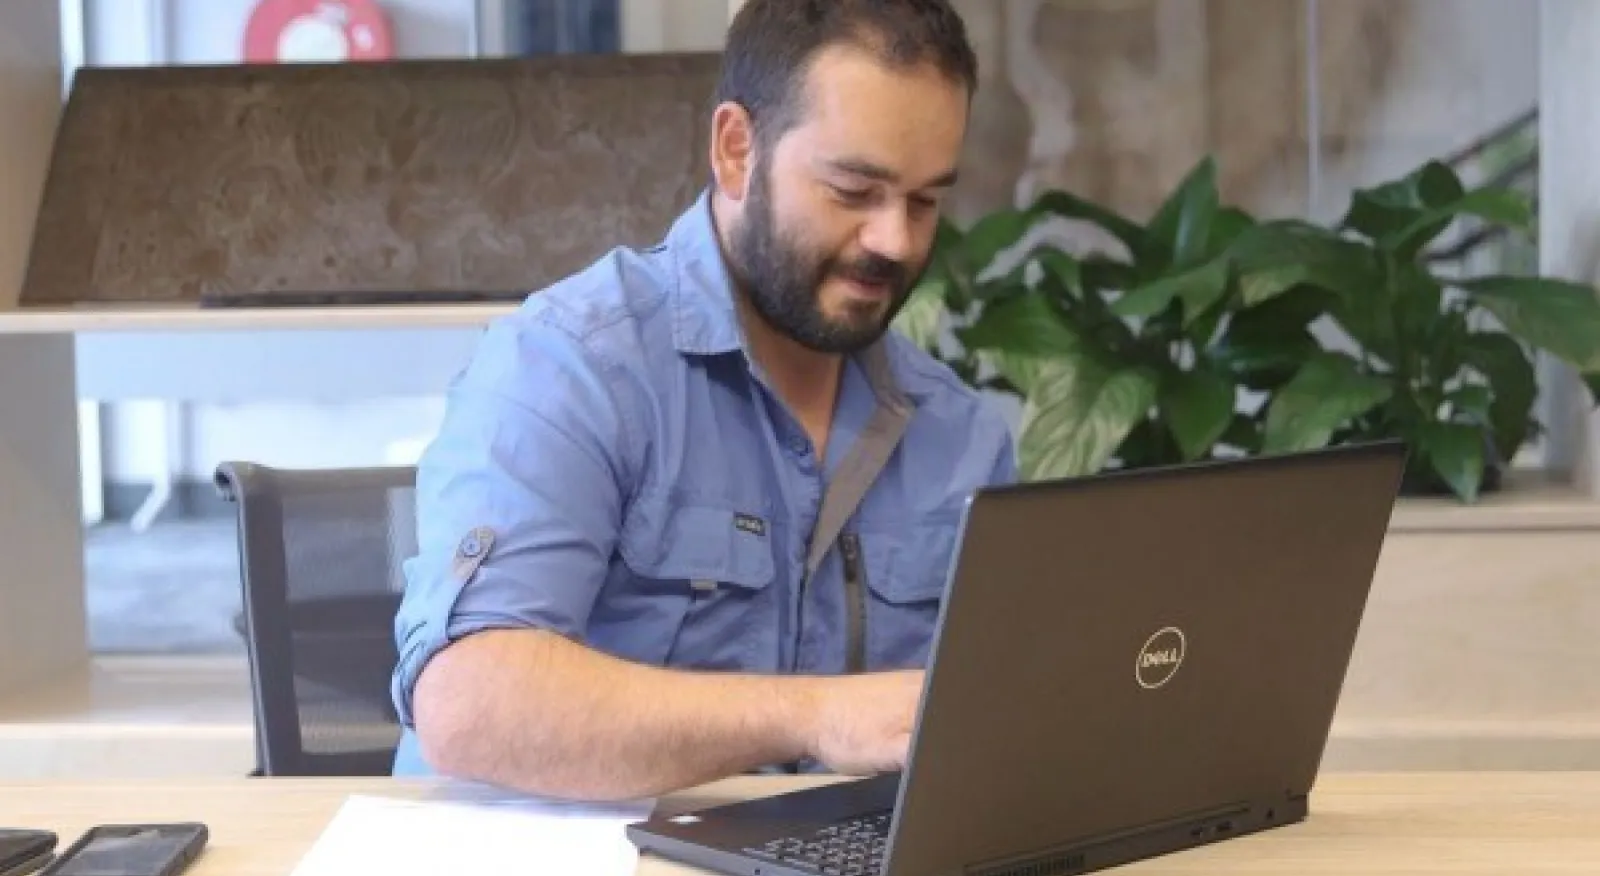 Clinton, a young man in a blue shirt, sits in front of a laptop in an office. He is typing and looking at the laptop screen.